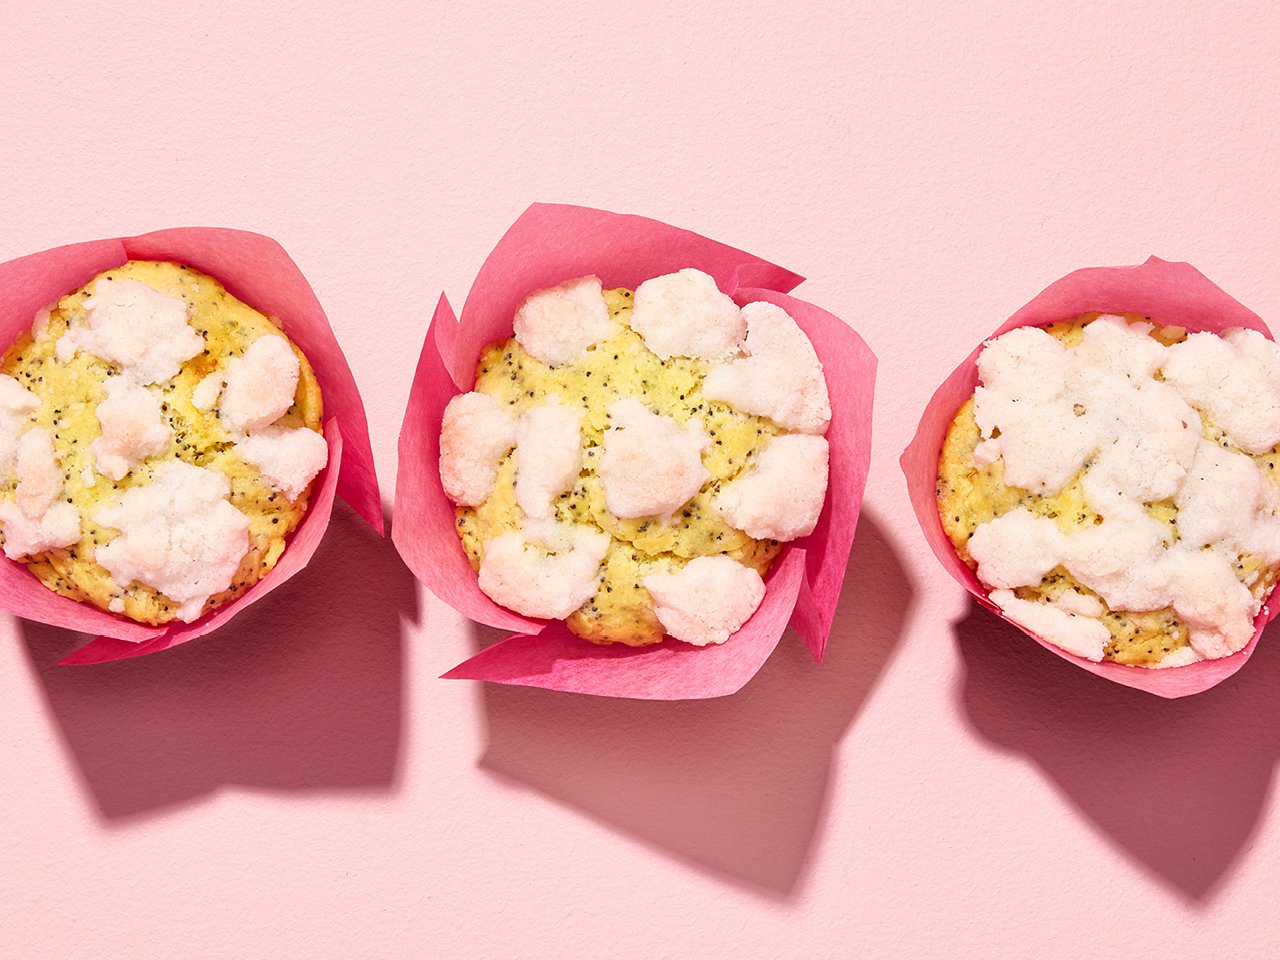 Five lemon poppy seed streusel muffins in pink wrappers on pink backdrop.